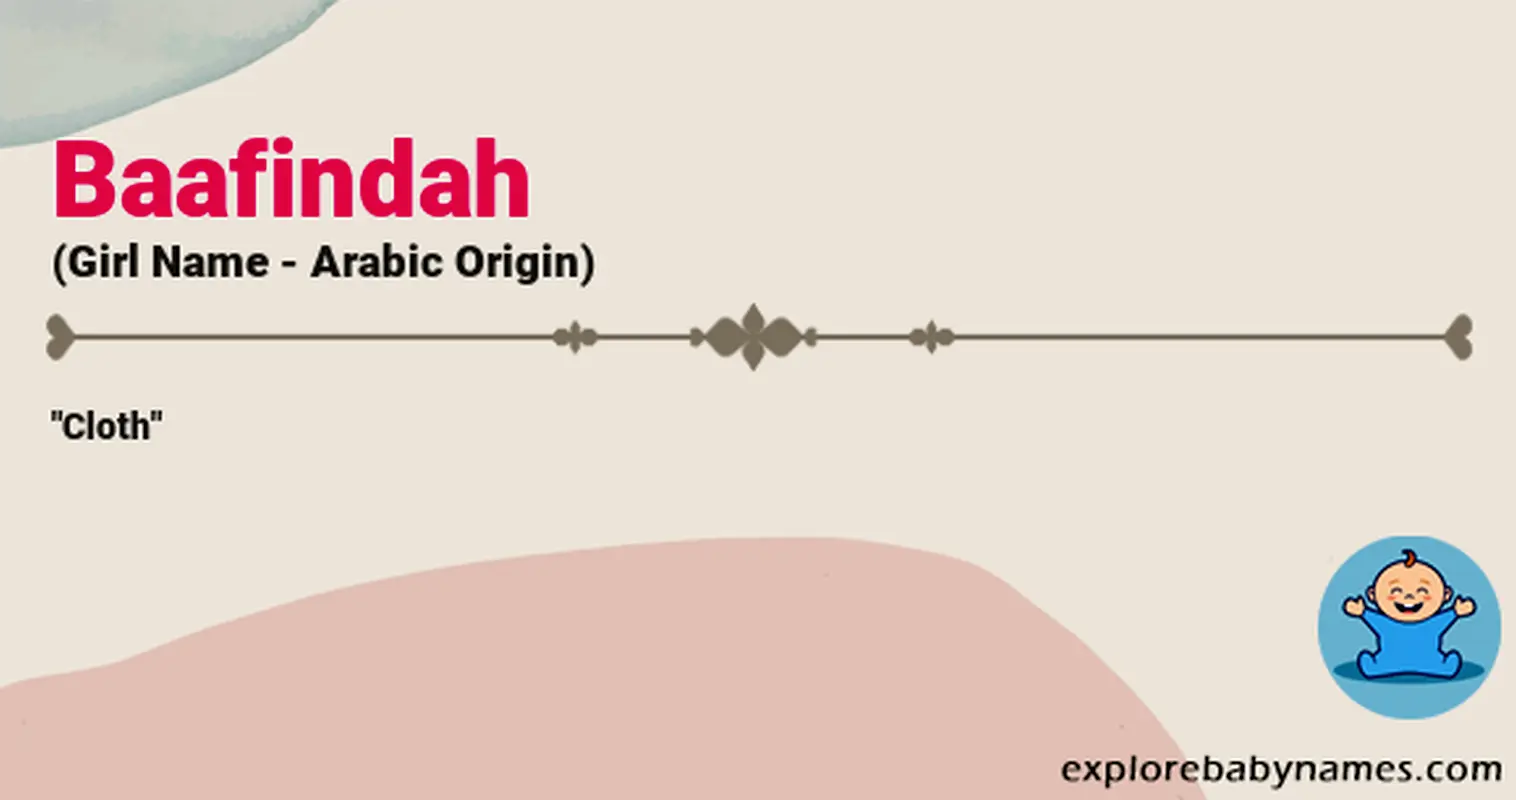 Meaning of Baafindah